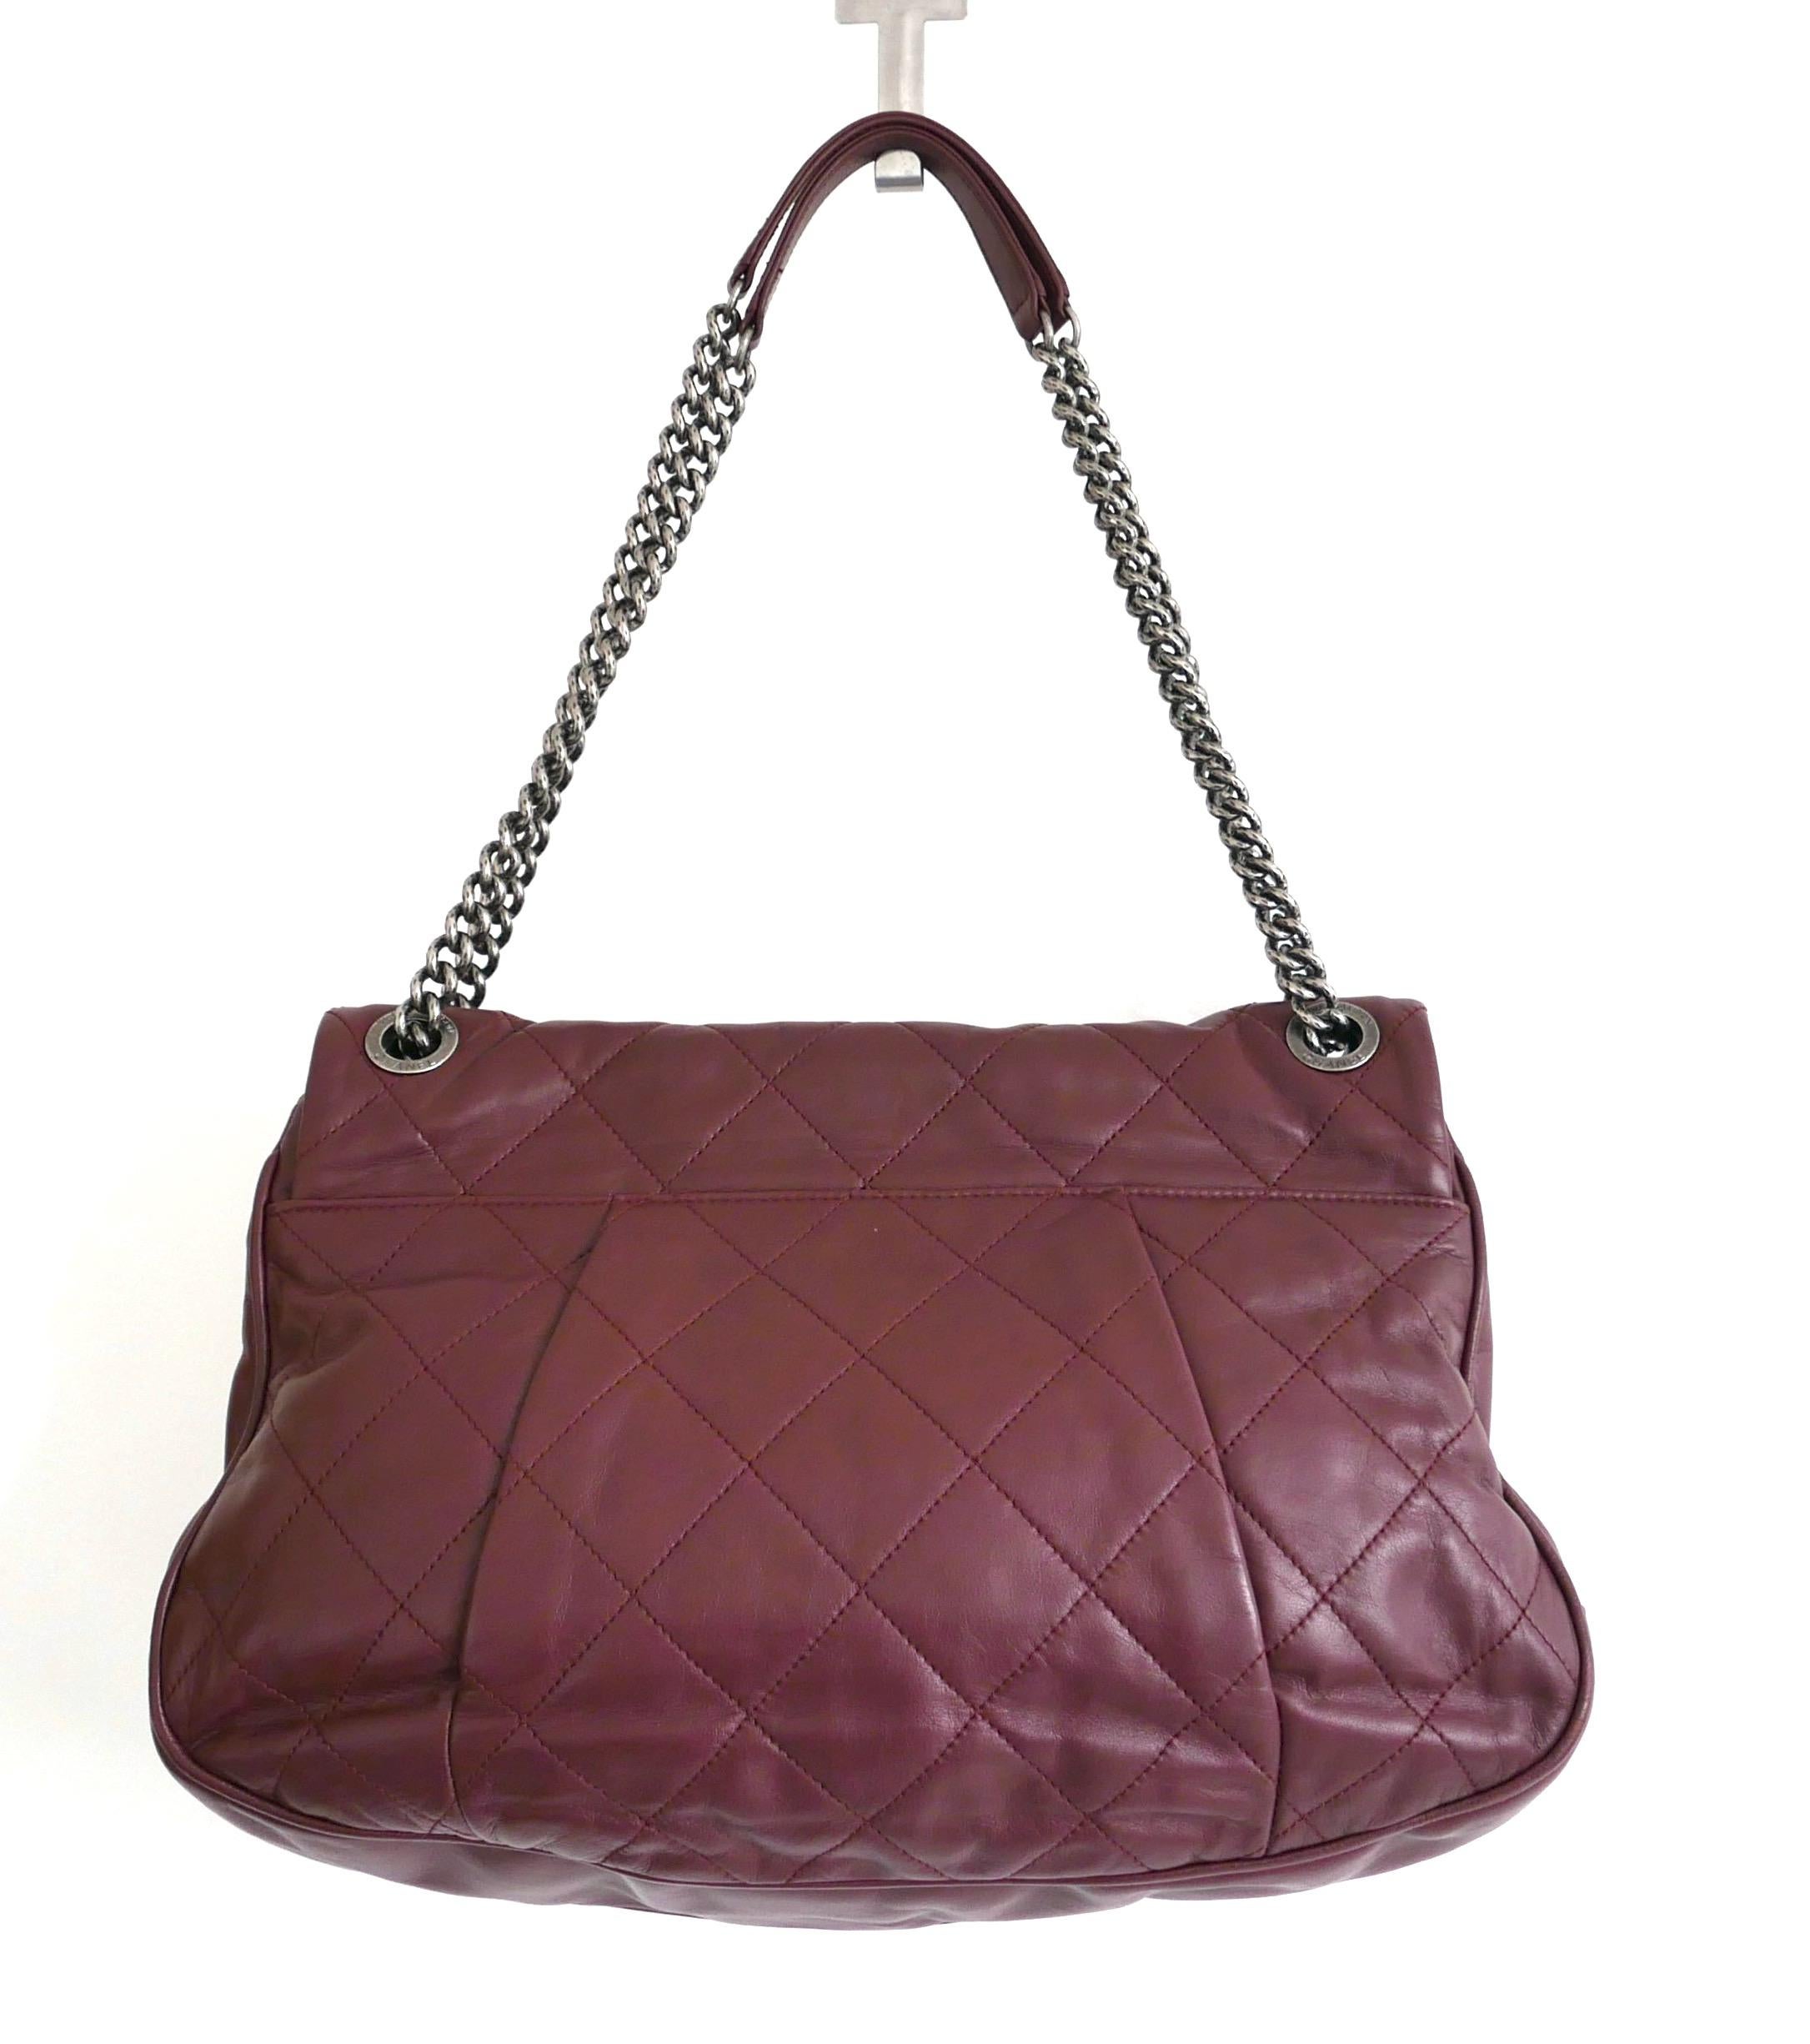 Chanel Coco Pleats Flap Bag Burgundy Quilted Leather For Sale 4